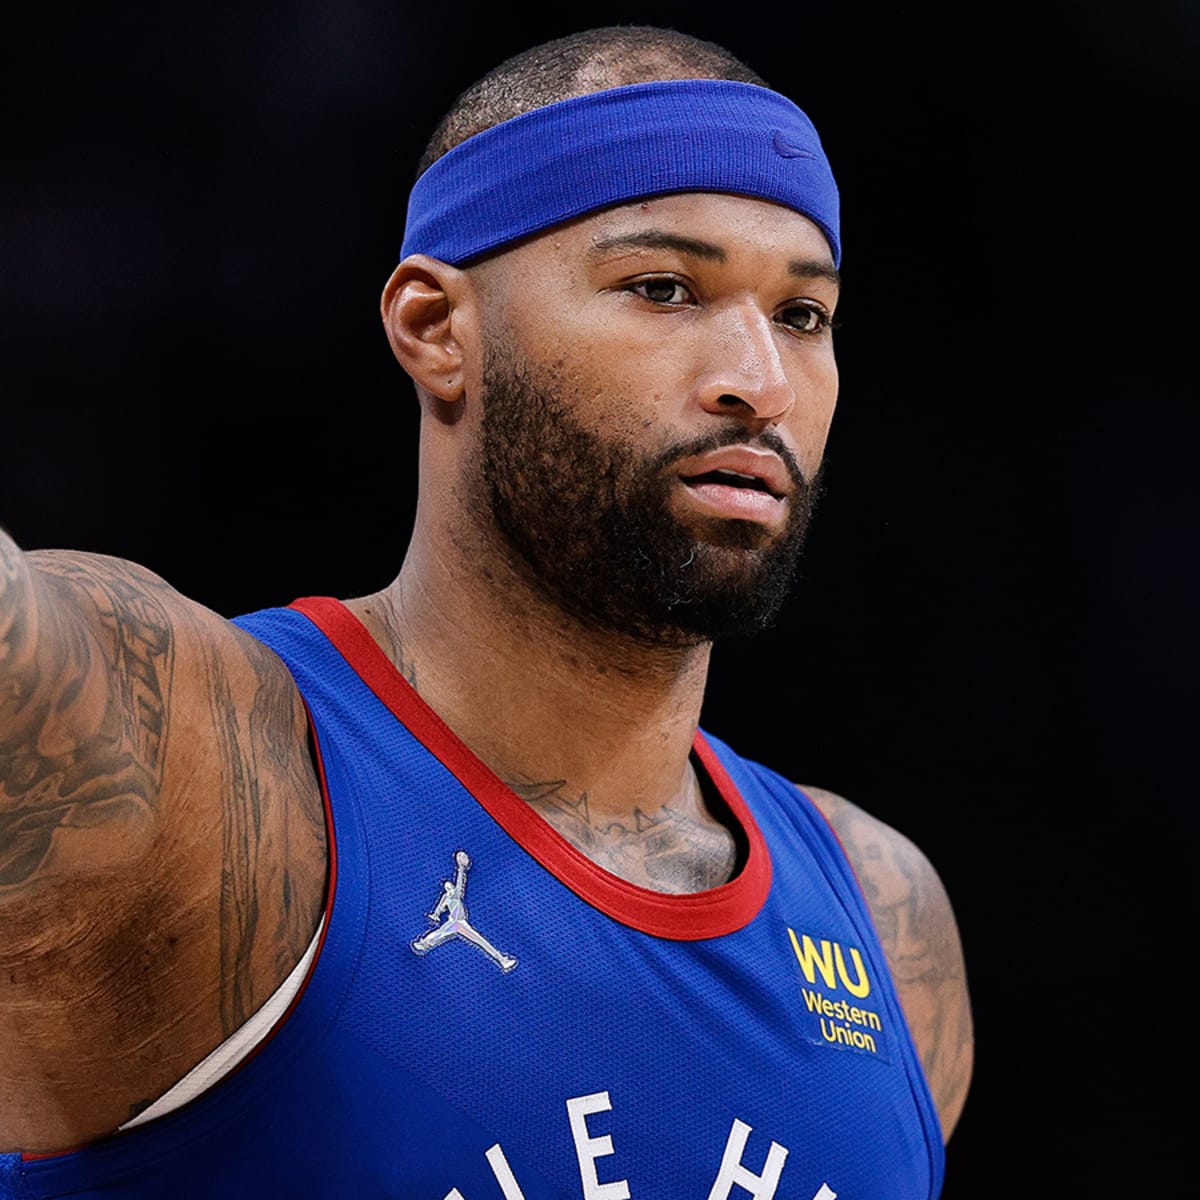 DeMarcus Cousins thinks he deserves to be in the Hall of Fame